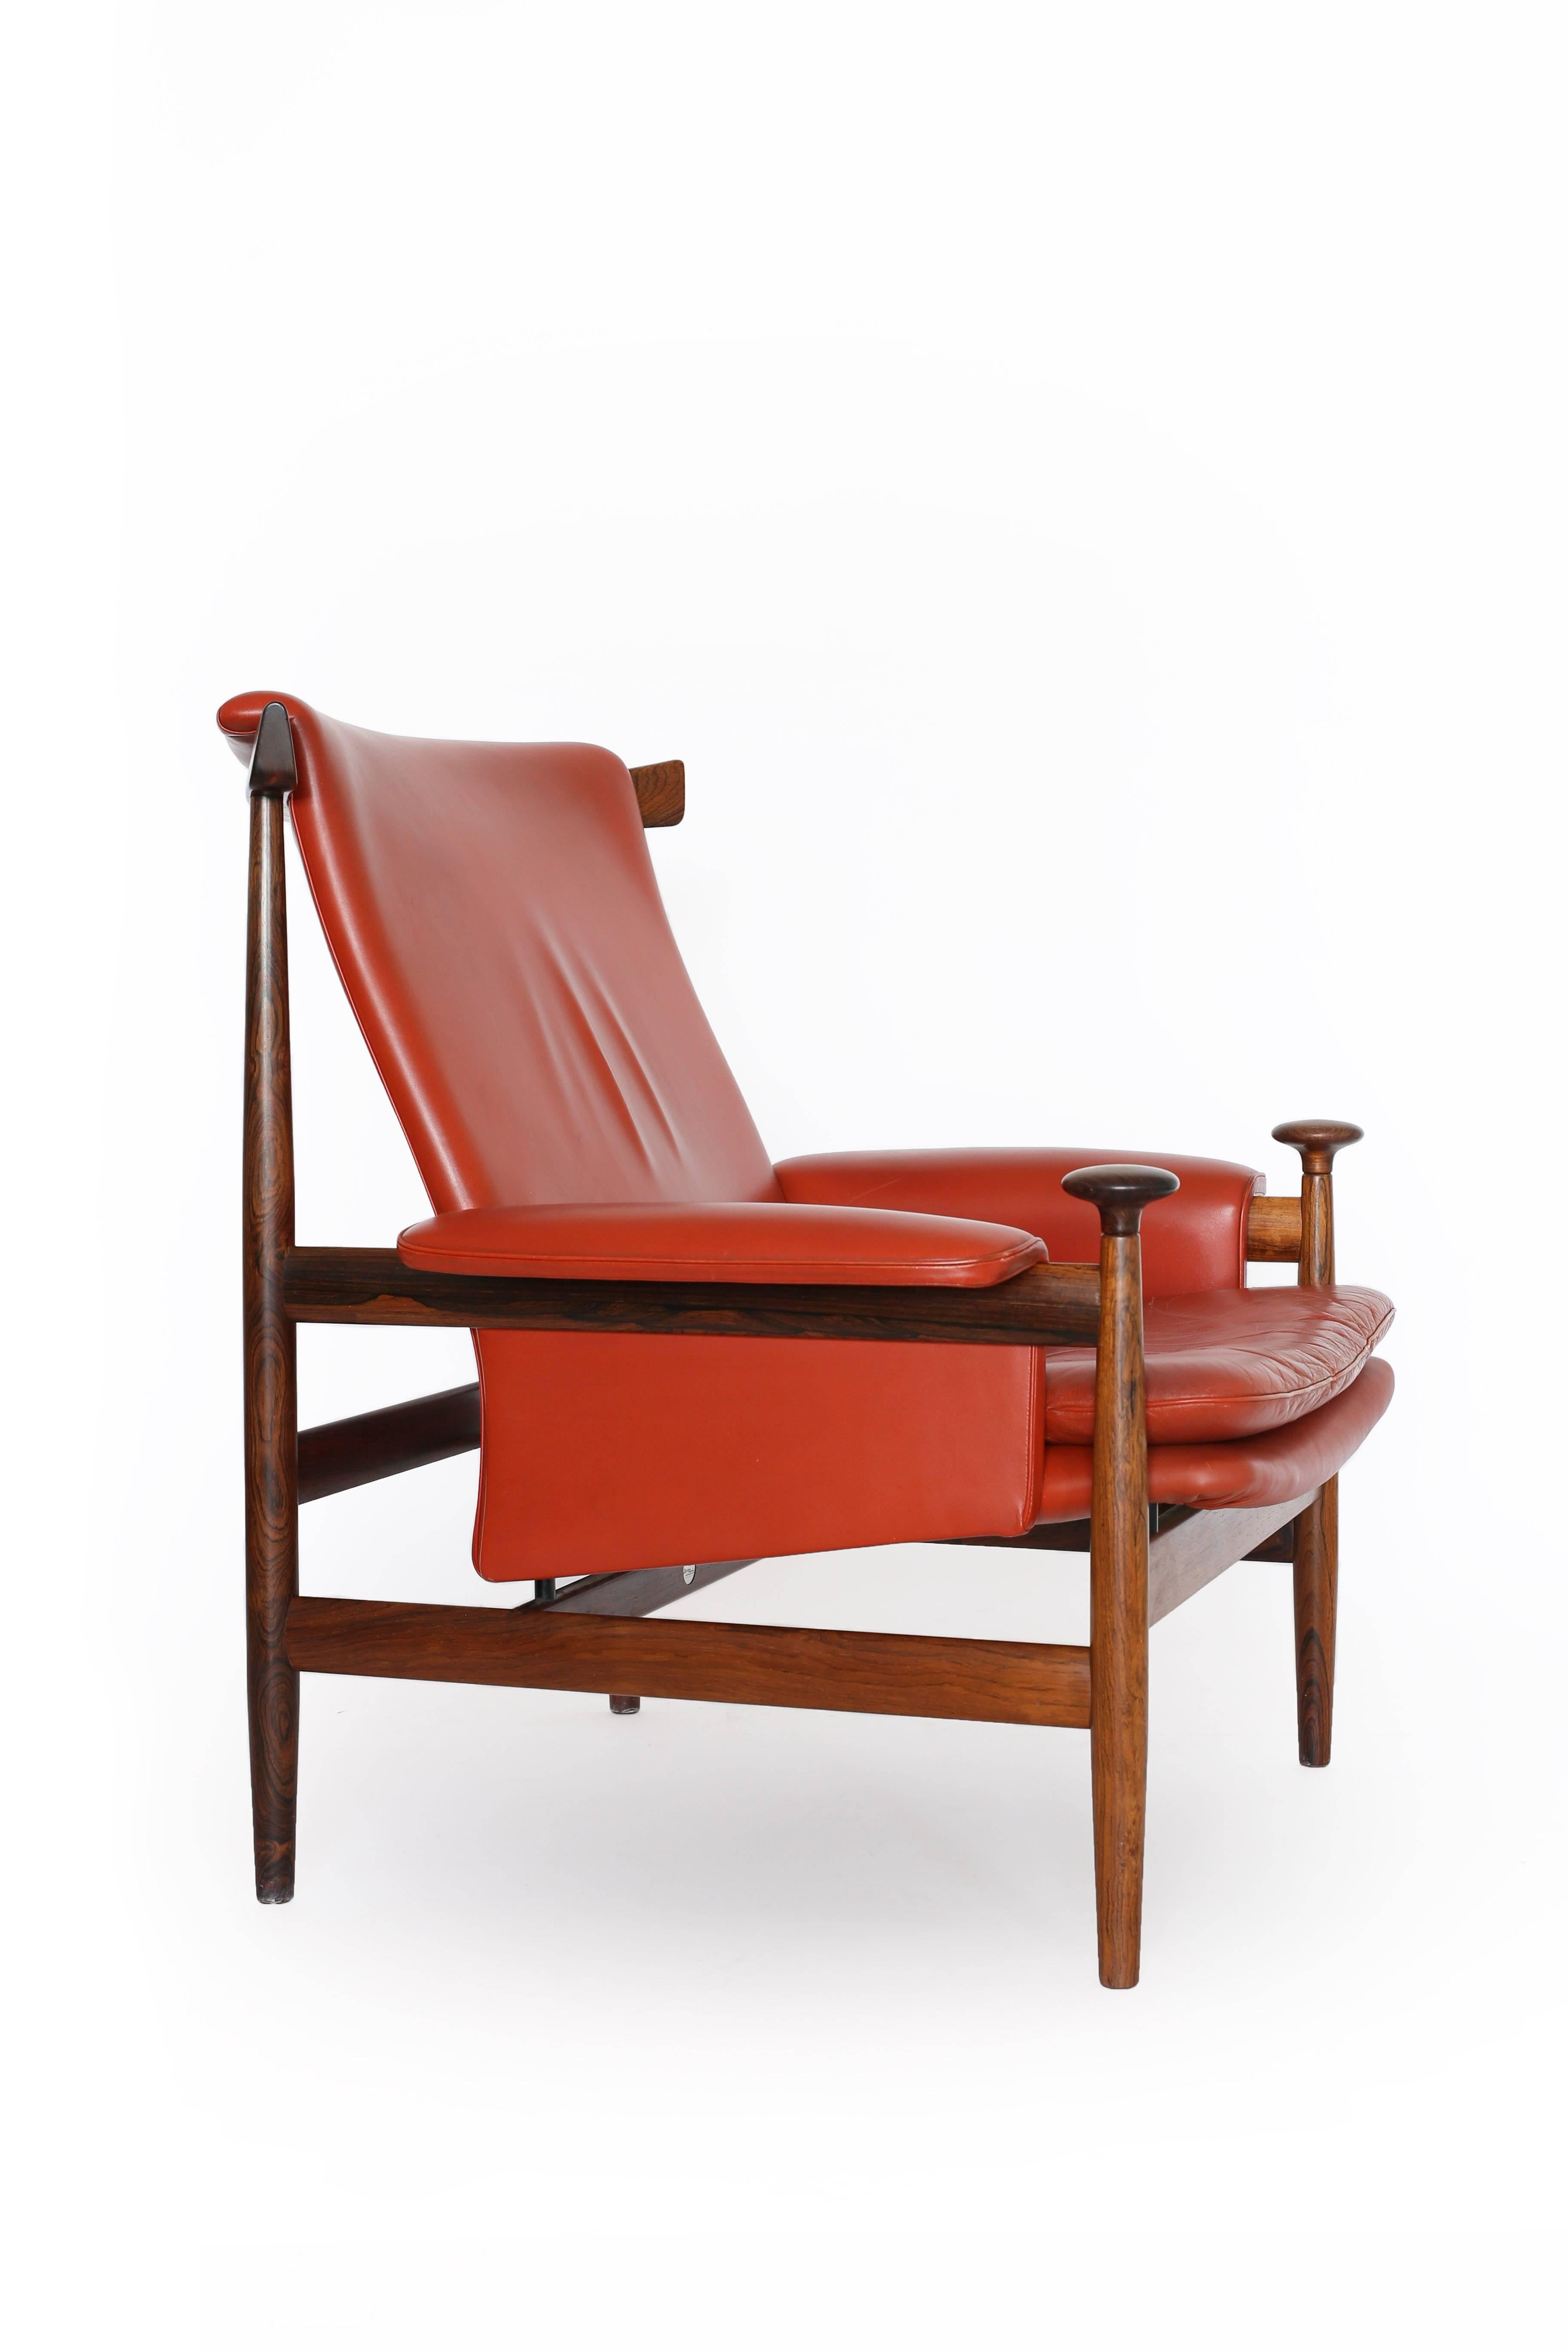 Finn Juhl Bwana chair with frame of rosewood upholstered with original red leather. 

Designed by Juhl 1961 and made by France & Son, Denmark. 

Fine original condition.